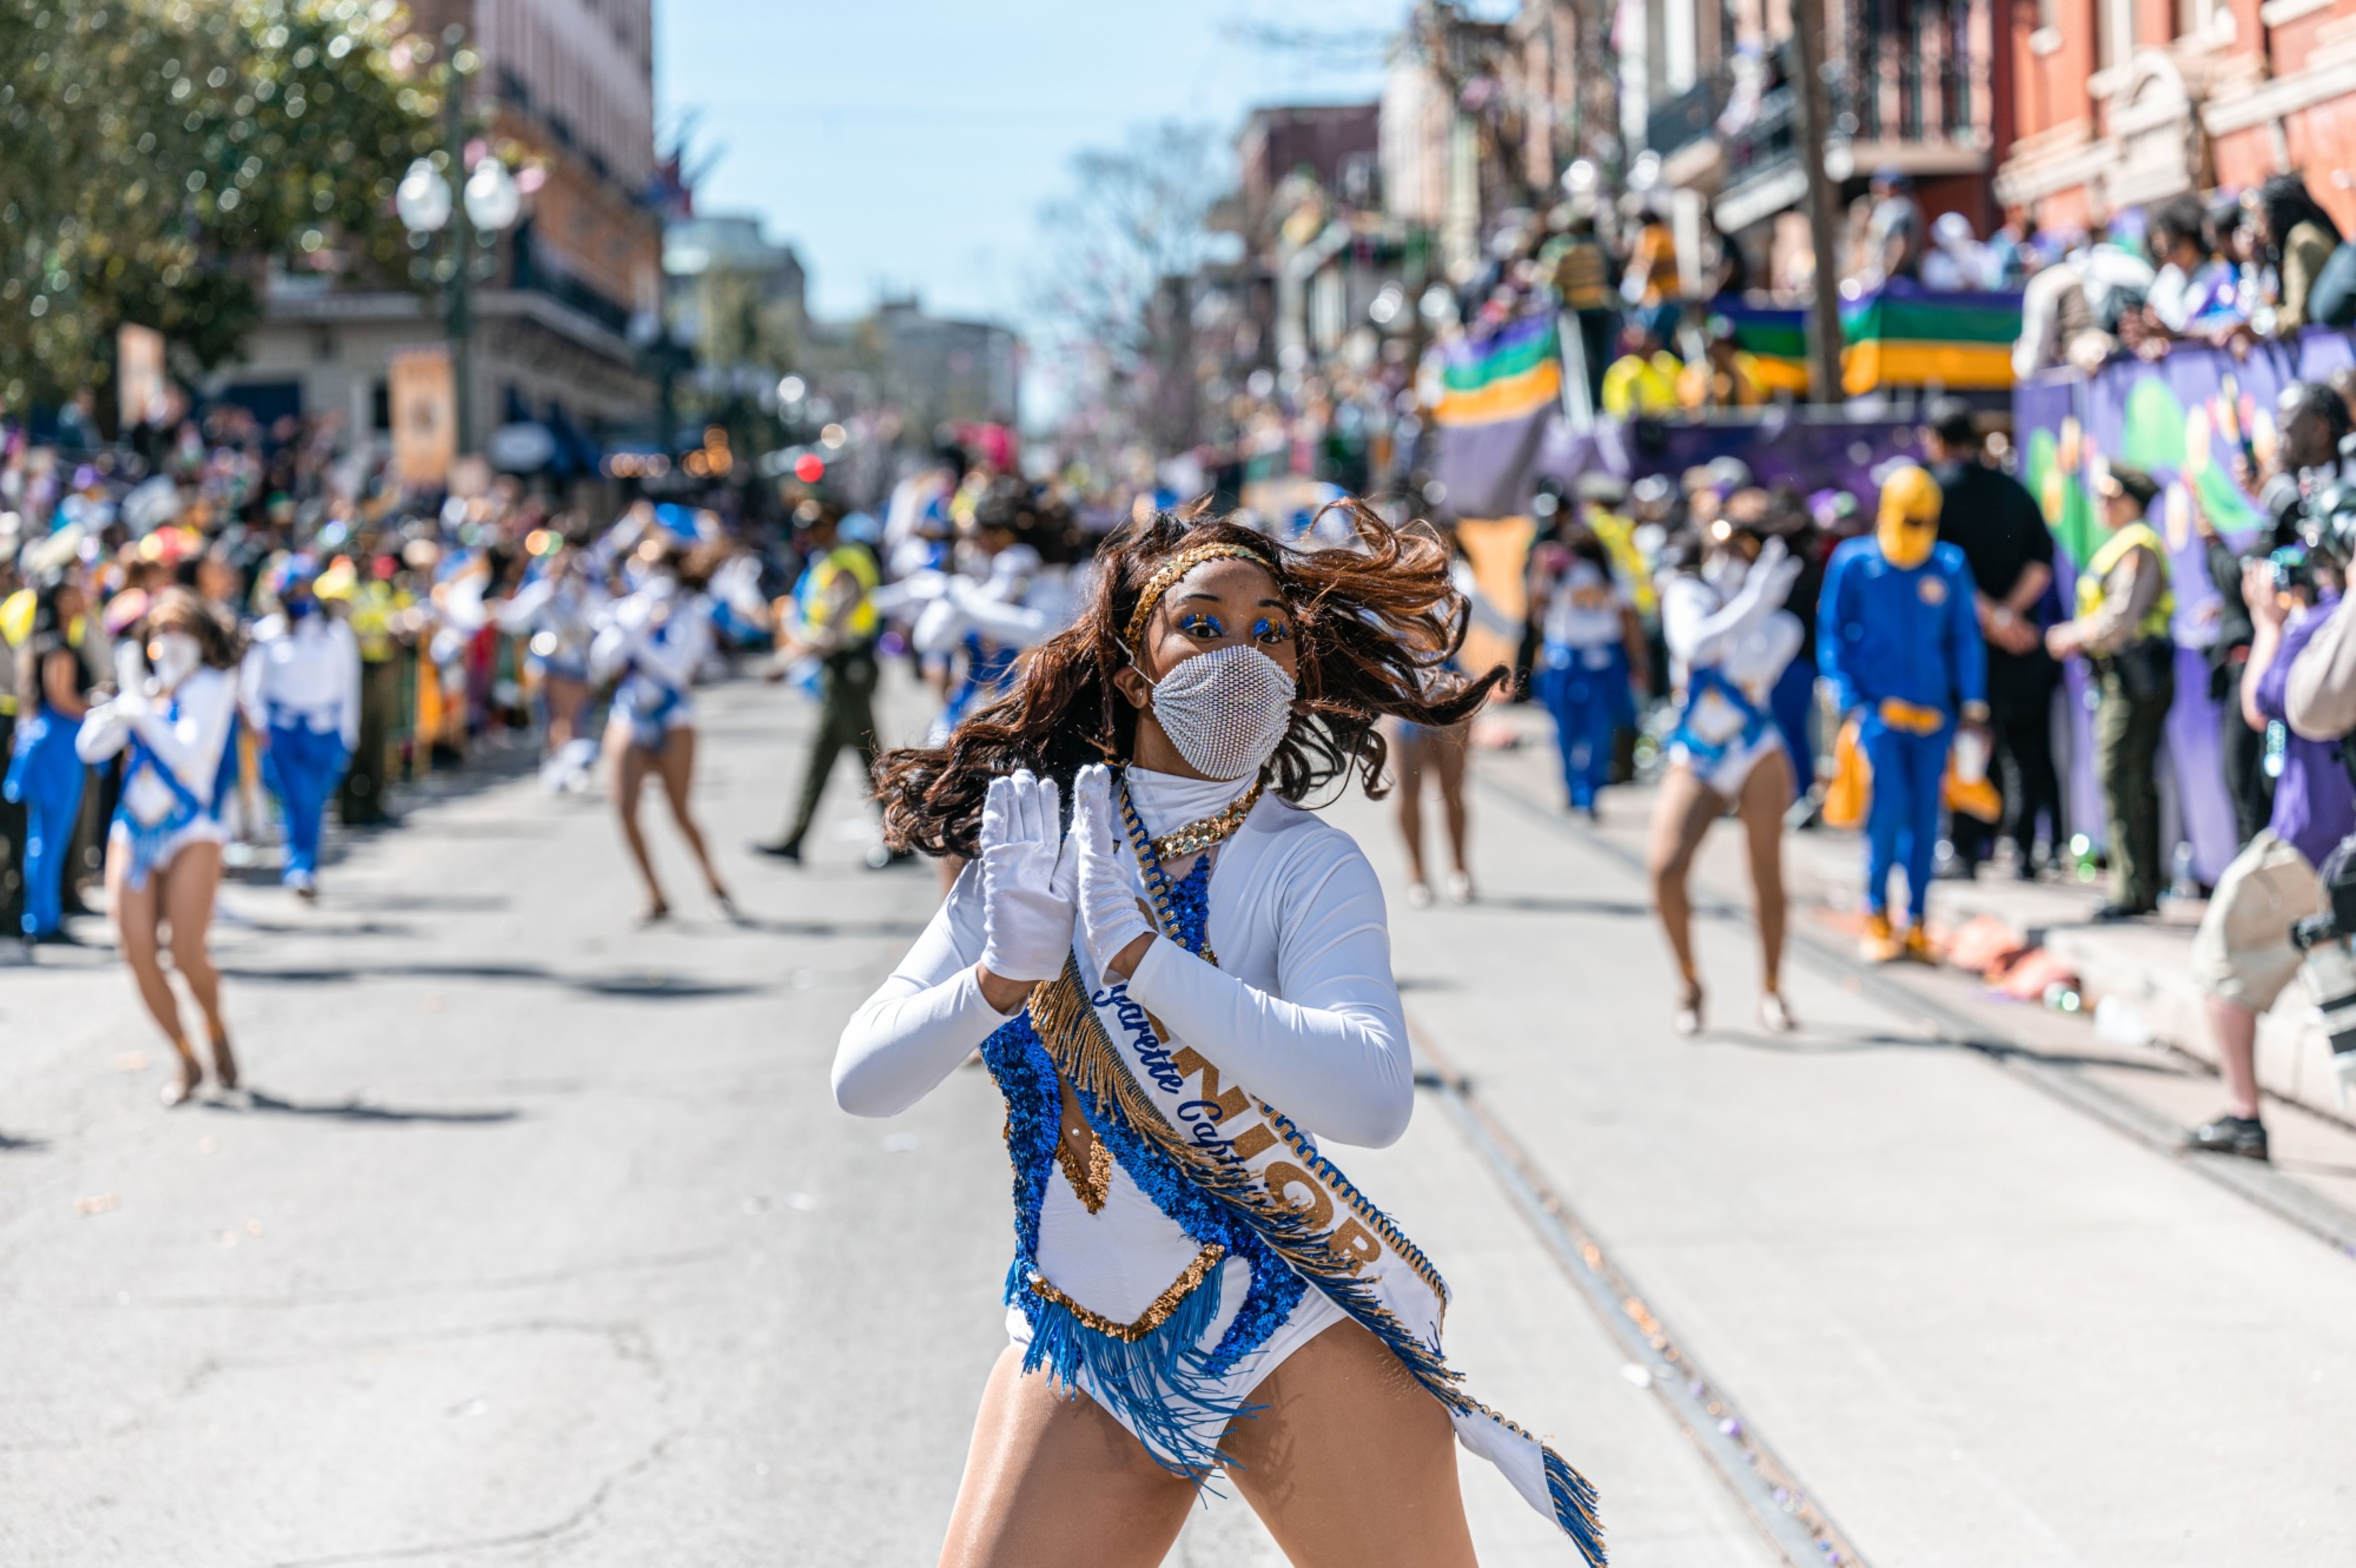 How the Krewes of Mardi Gras Keep New Orleans Together Bloomberg